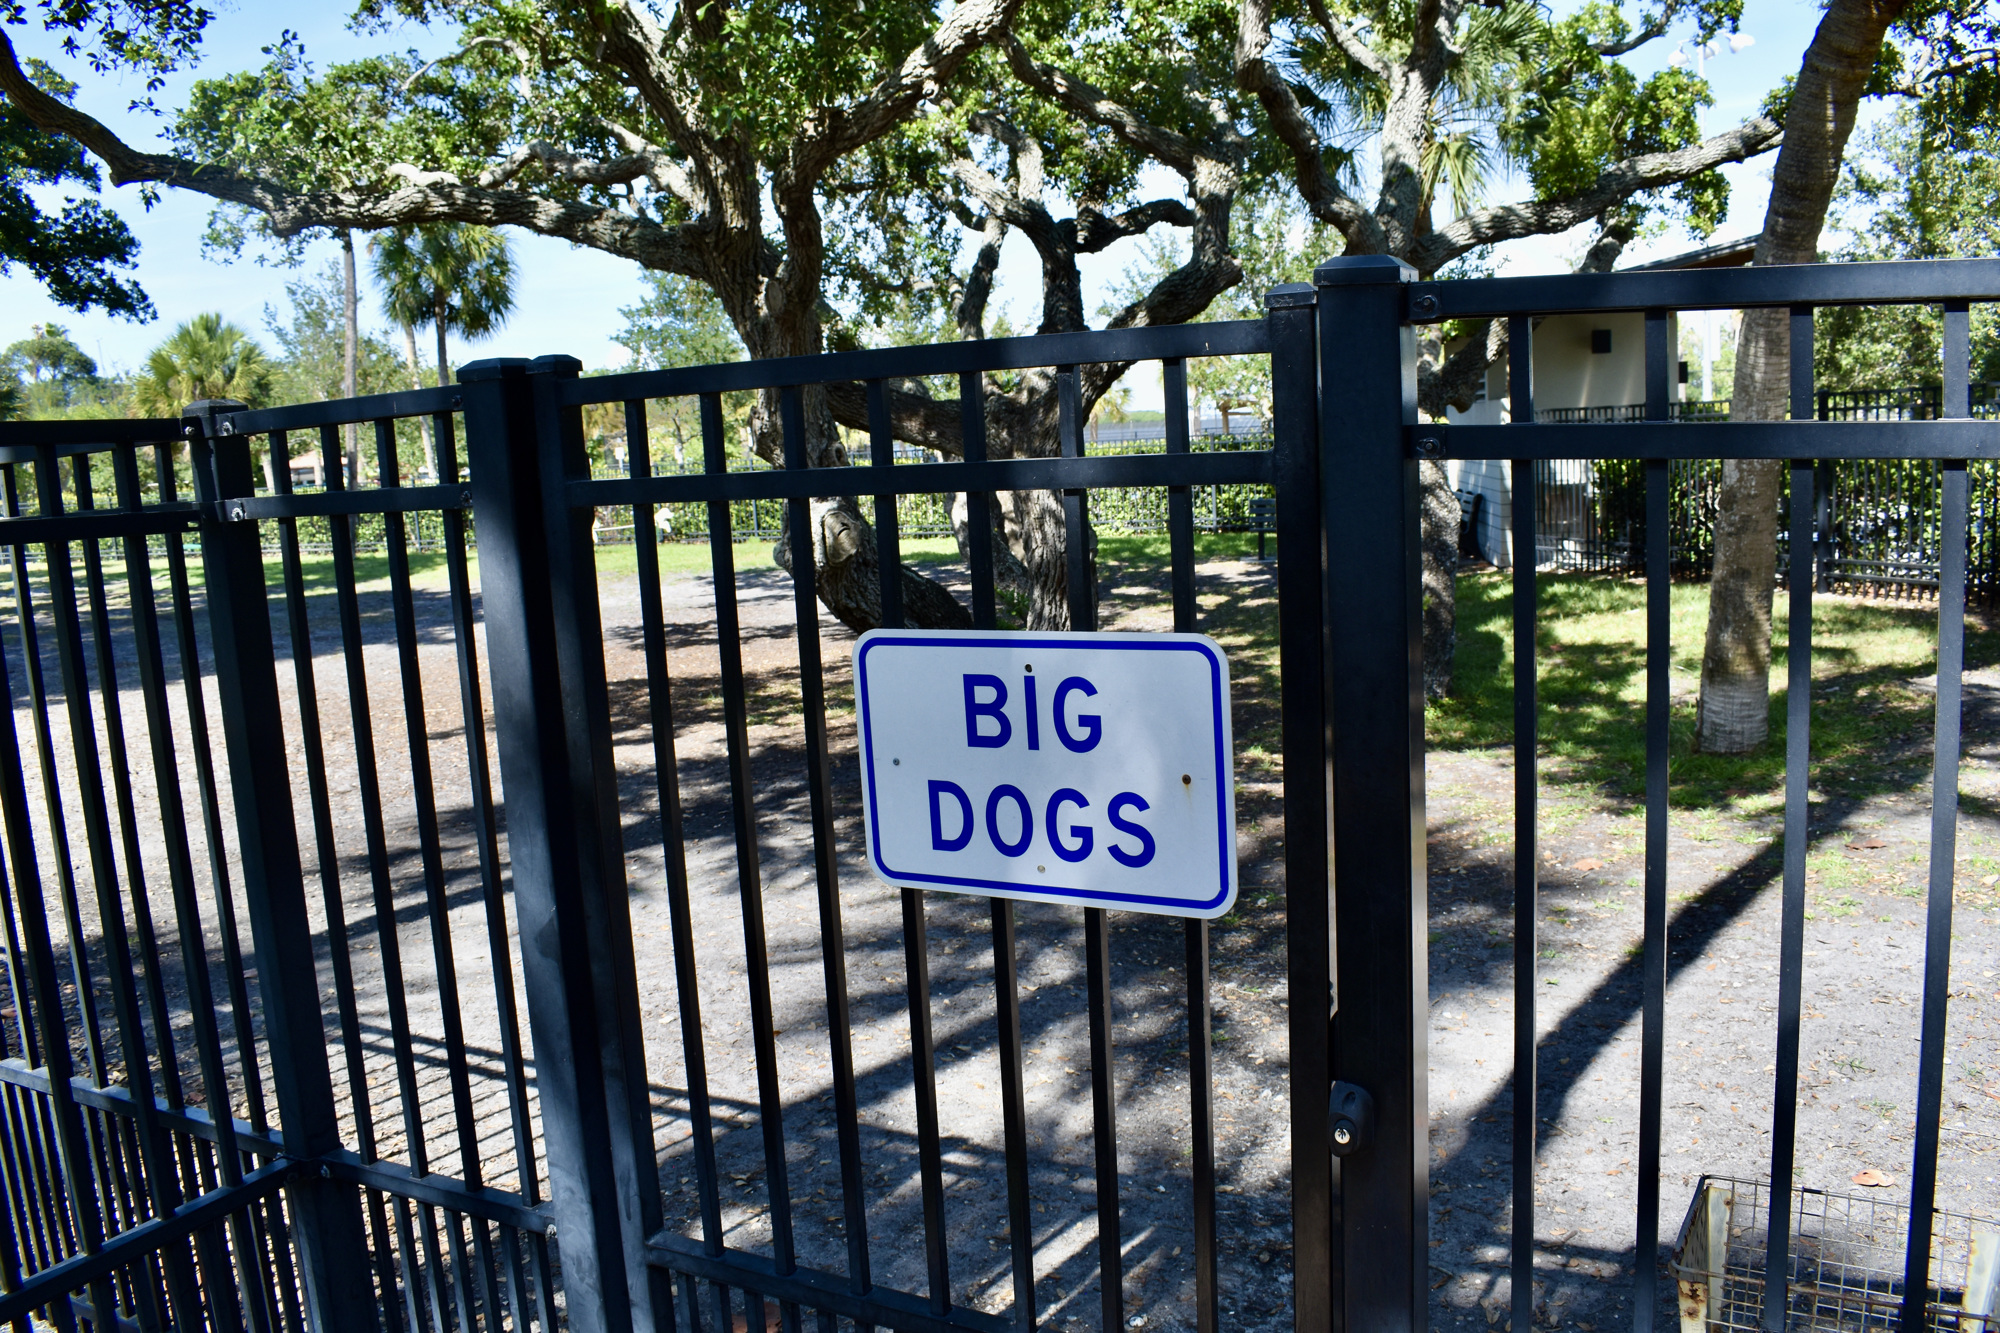 After a summer resod in 2021, broad swaths of dirt have returned to the Bayfront Park dog park.